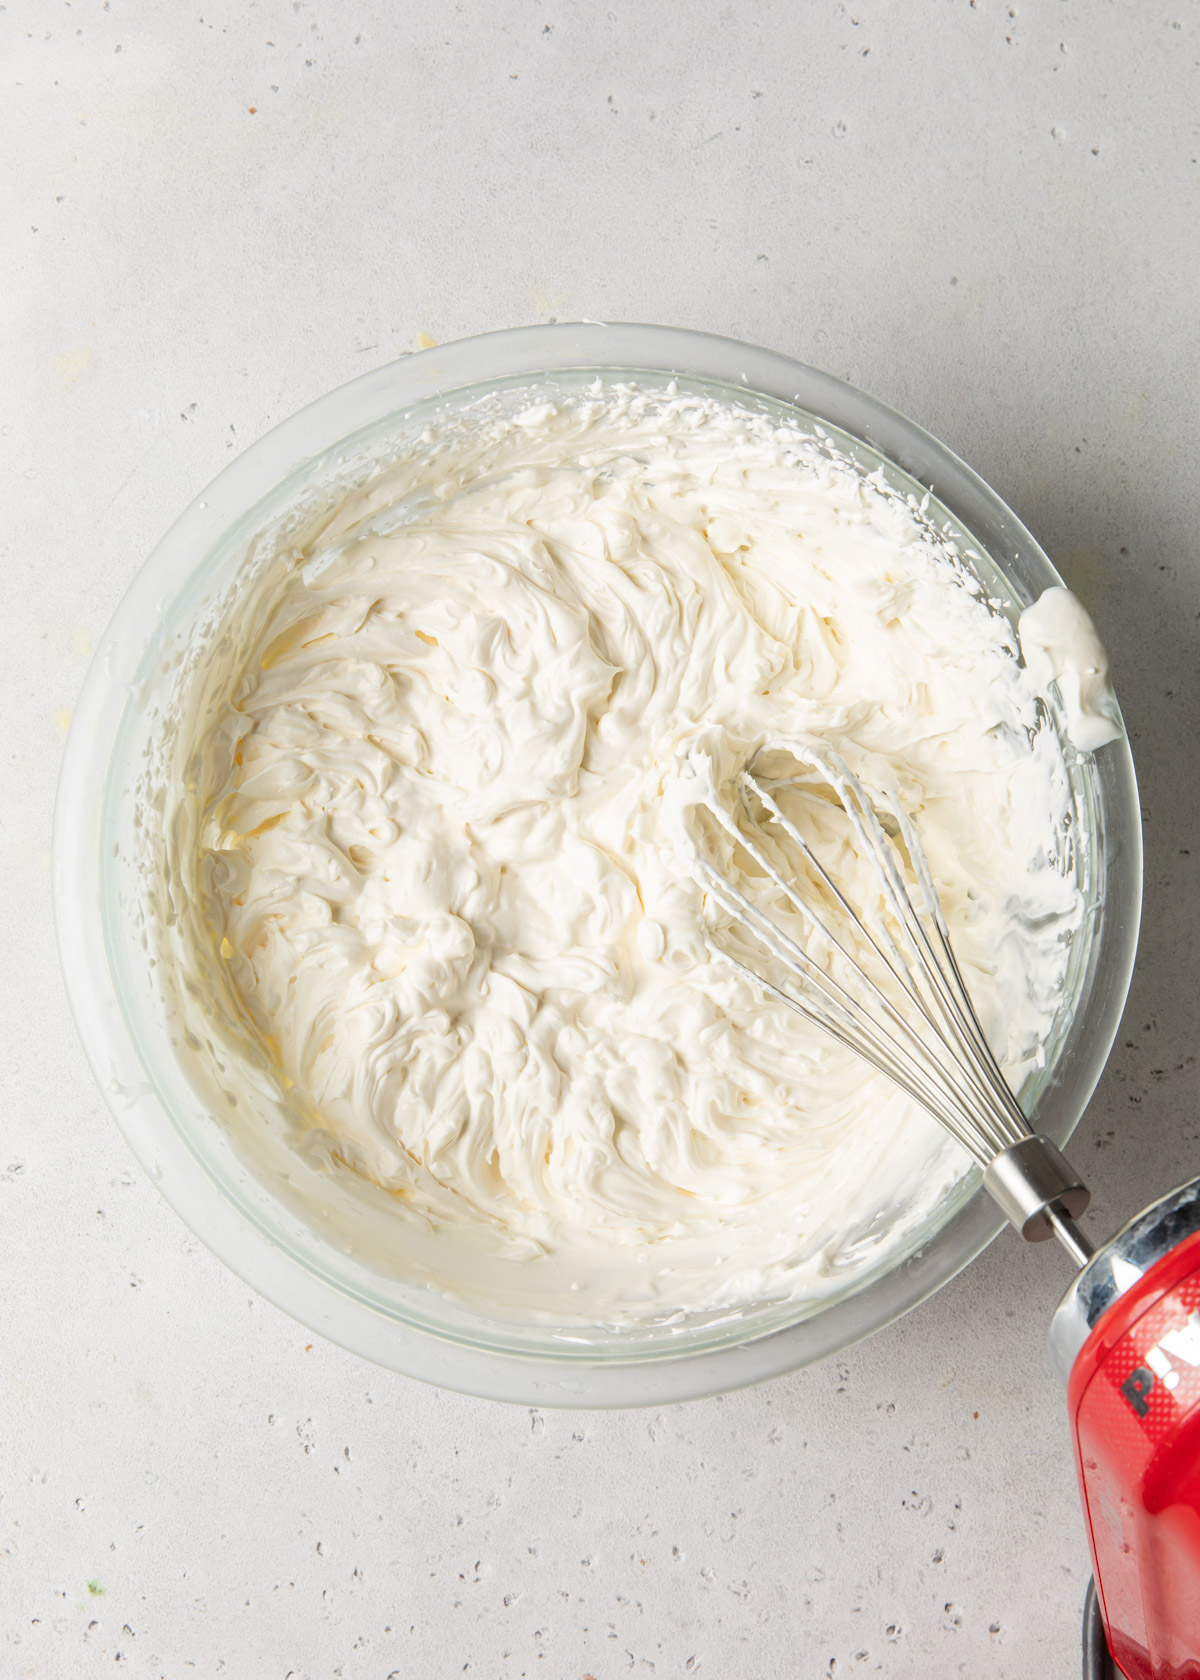 Whipped cream that has reached stiff peaks in a glass bowl